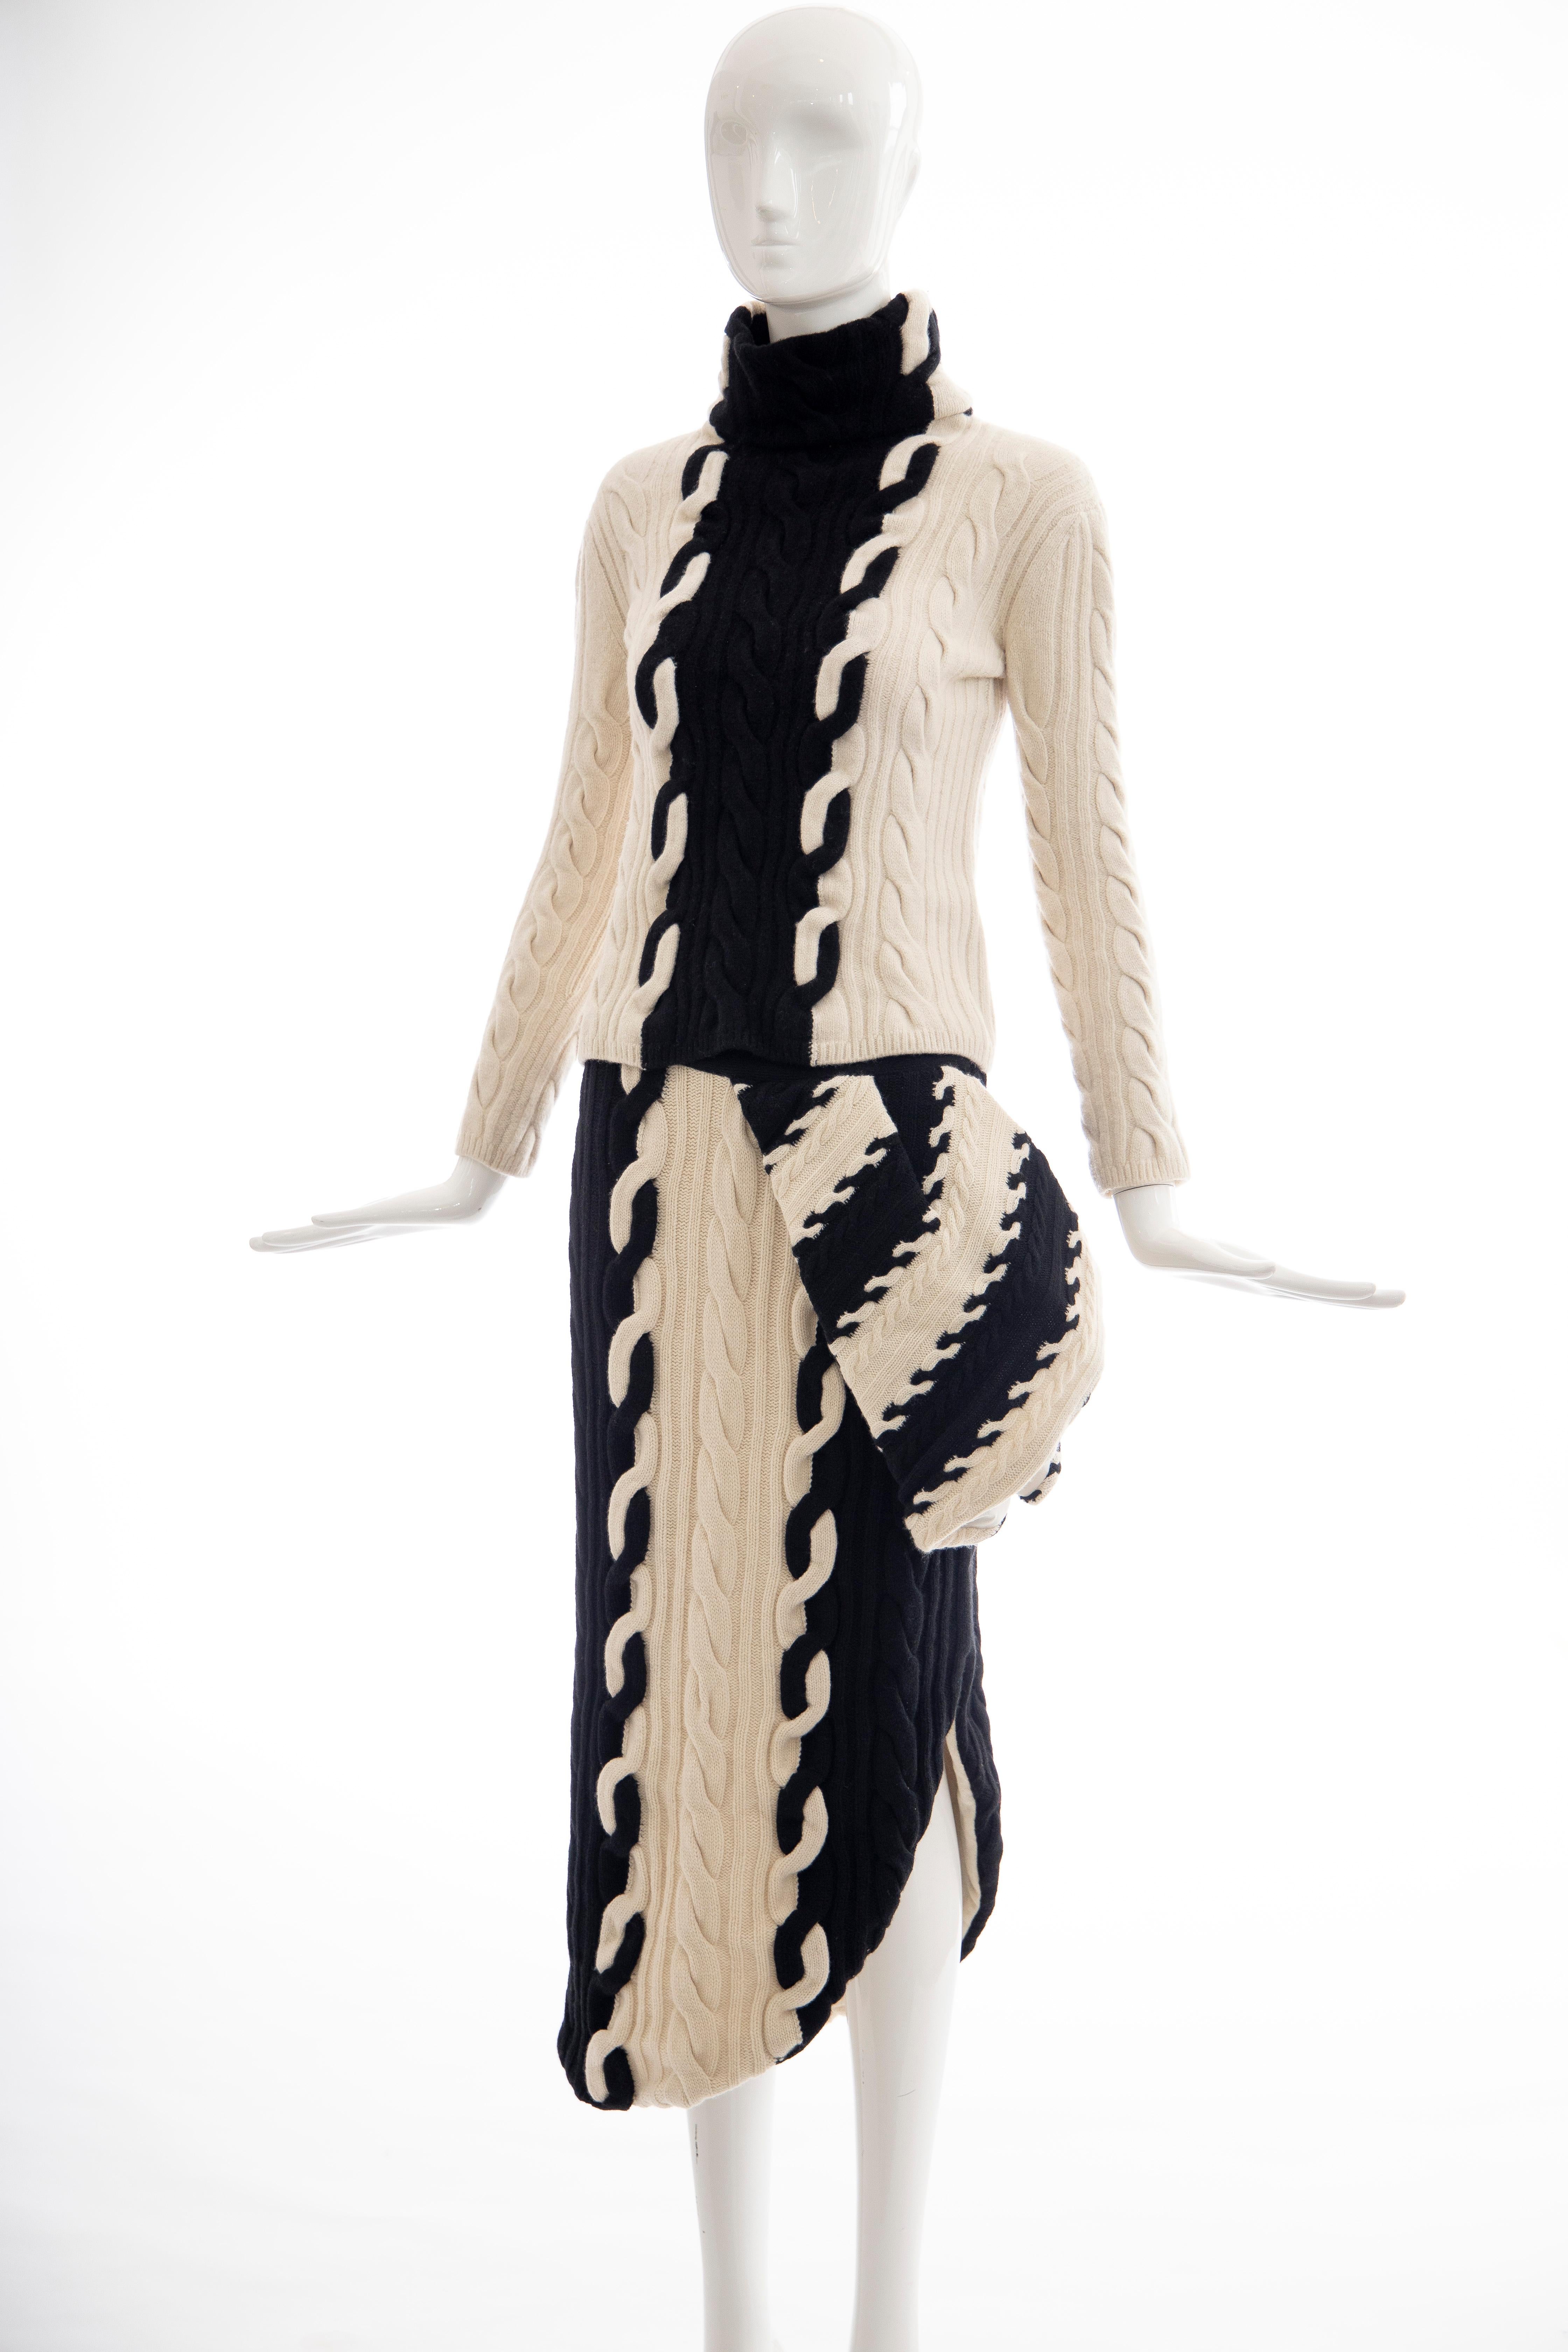 Raf Simons for Christian Dior Wool Cashmere Cable Knit Skirt-Suit, Fall 2013 6